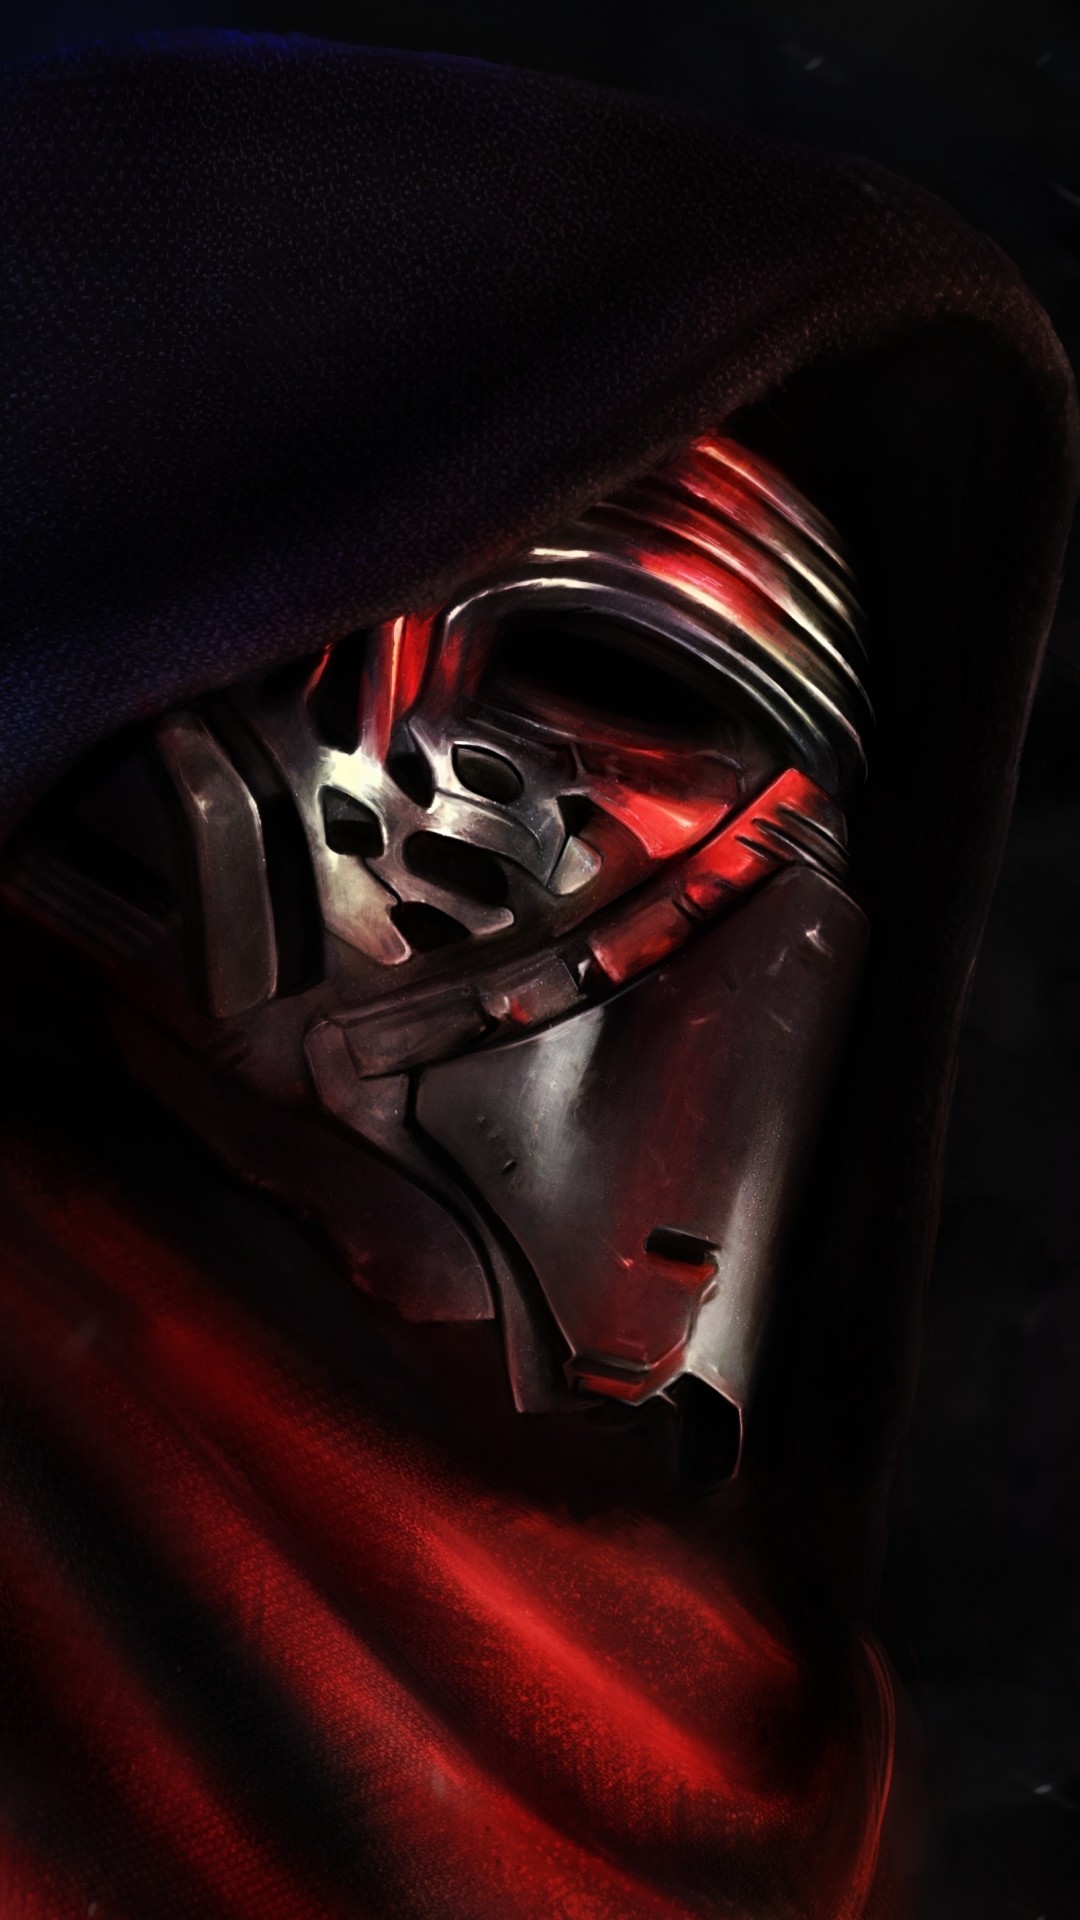 1080x1920 ... wallpaper weekends star wars the force awakens for the iphone ...